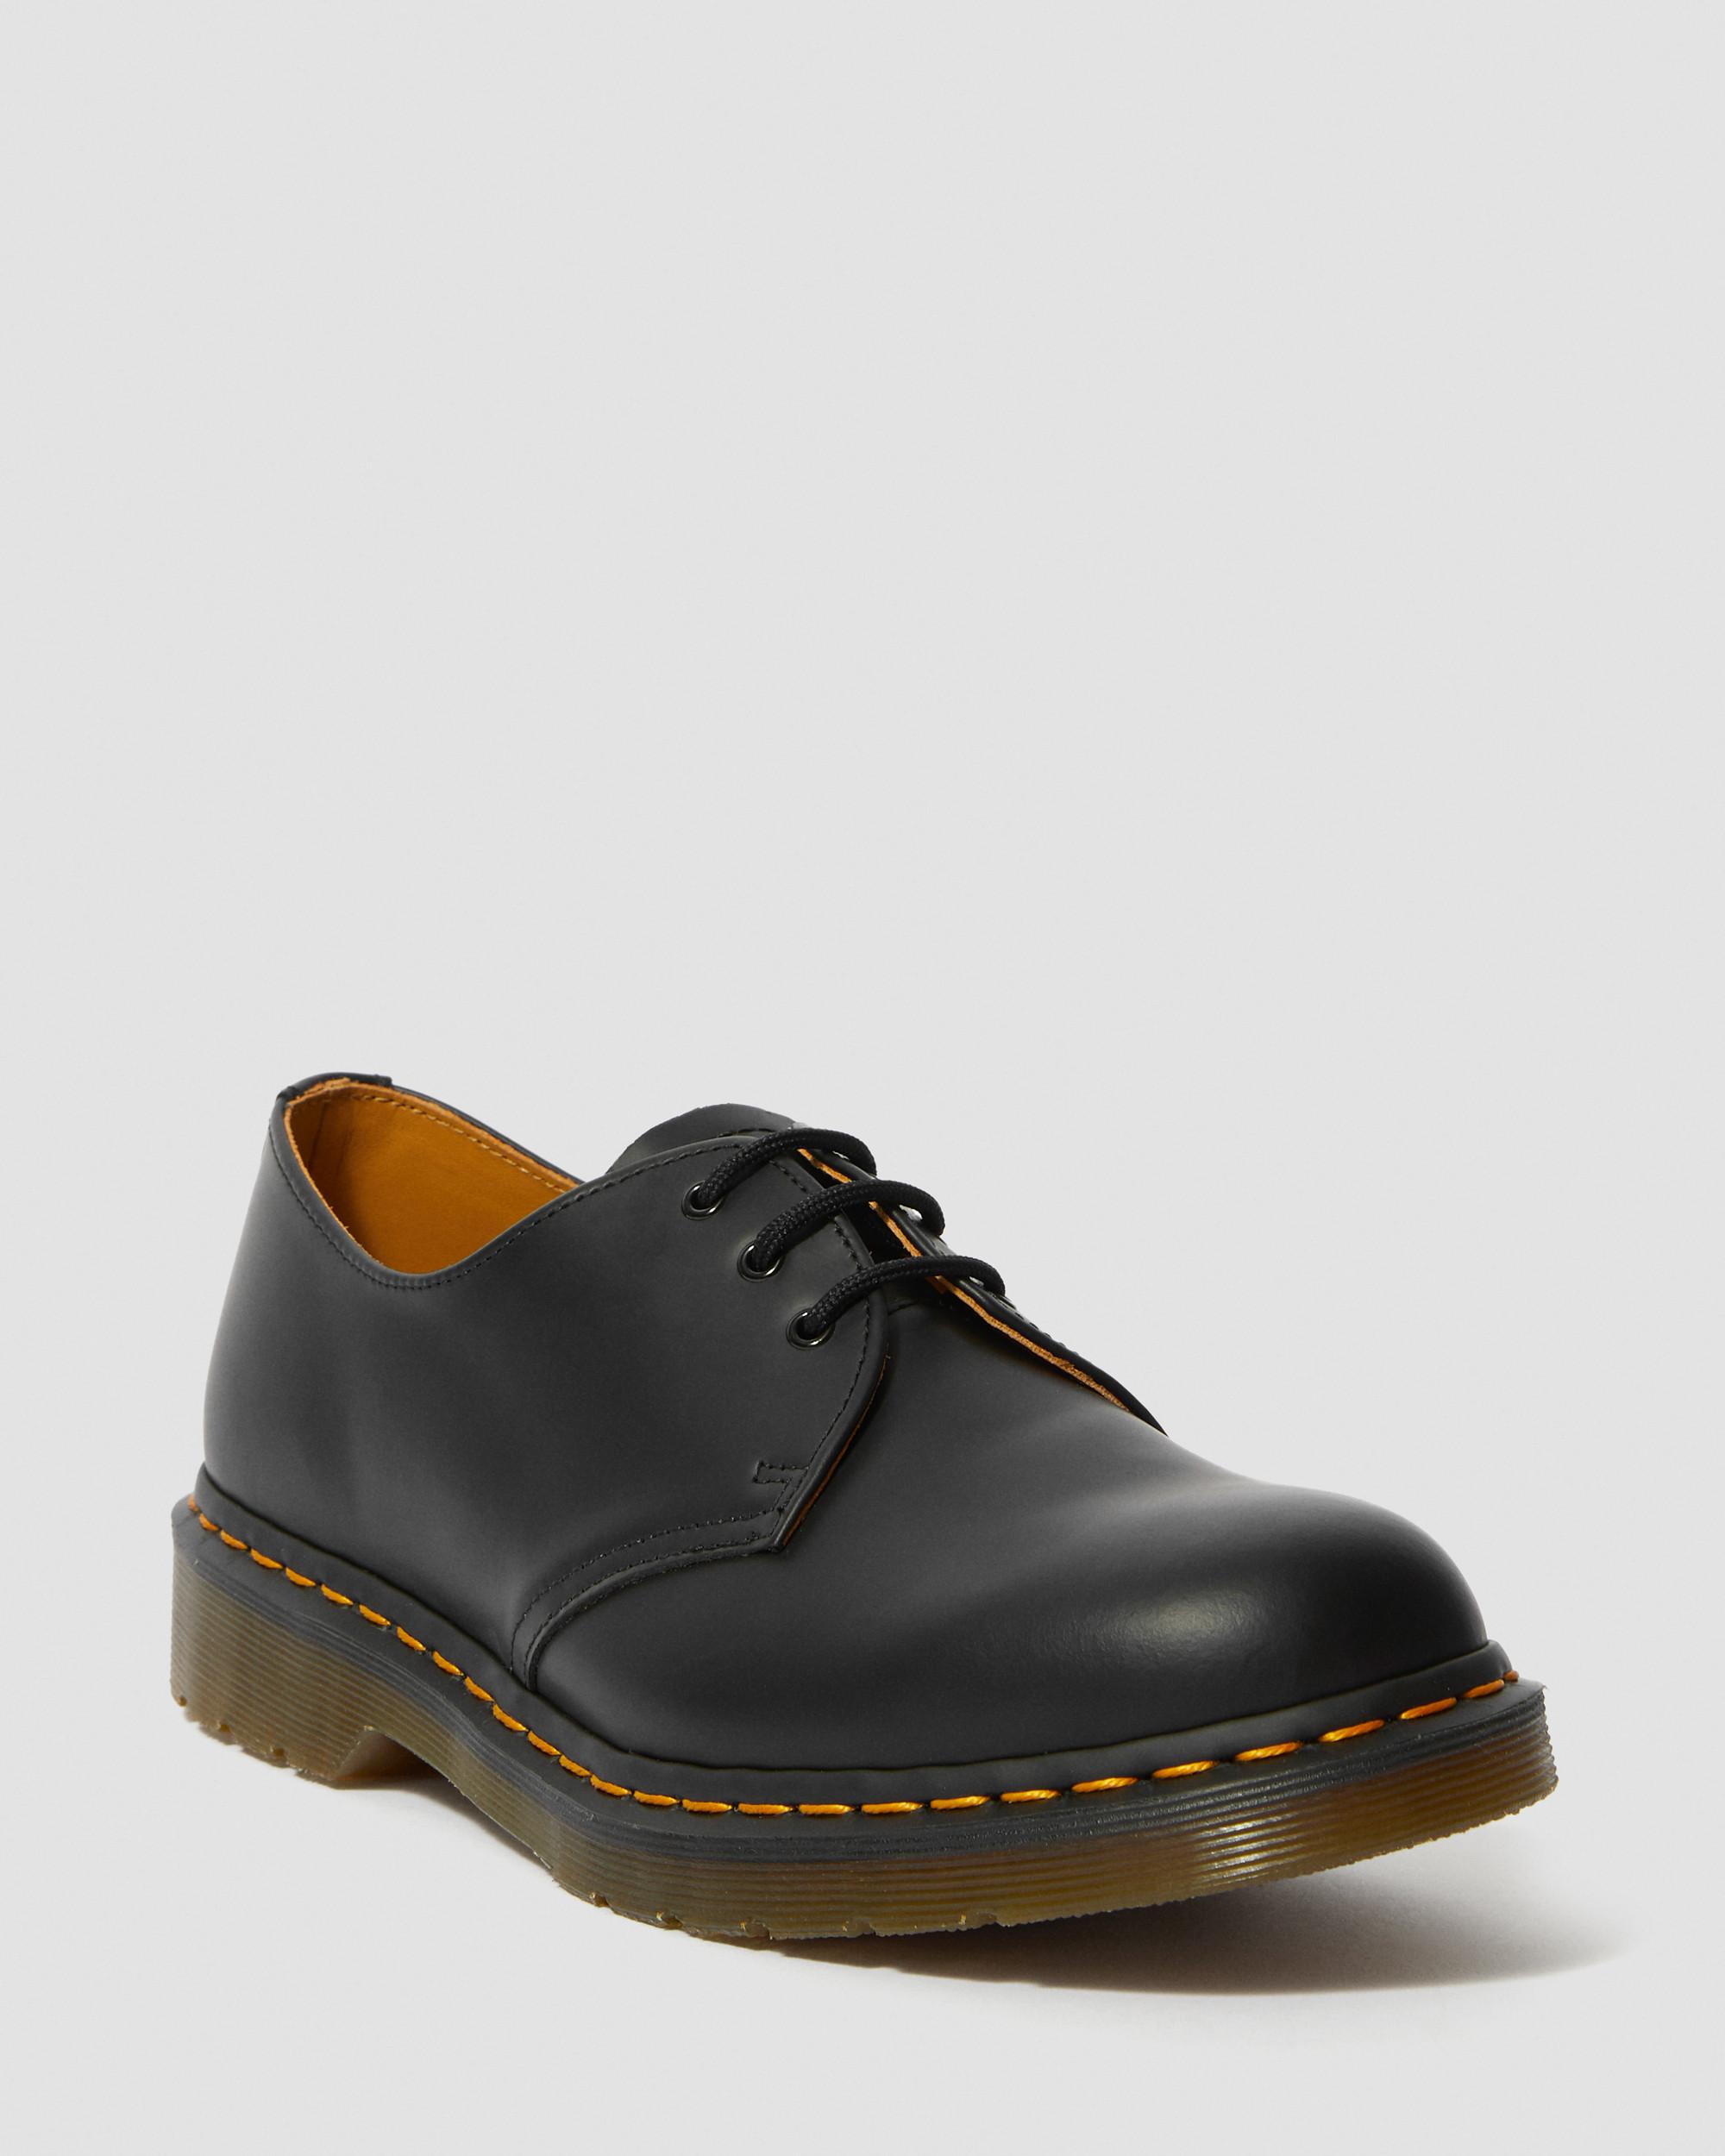 Shuraba Sportschool James Dyson 1461 Smooth Leather Oxford Shoes | Dr. Martens